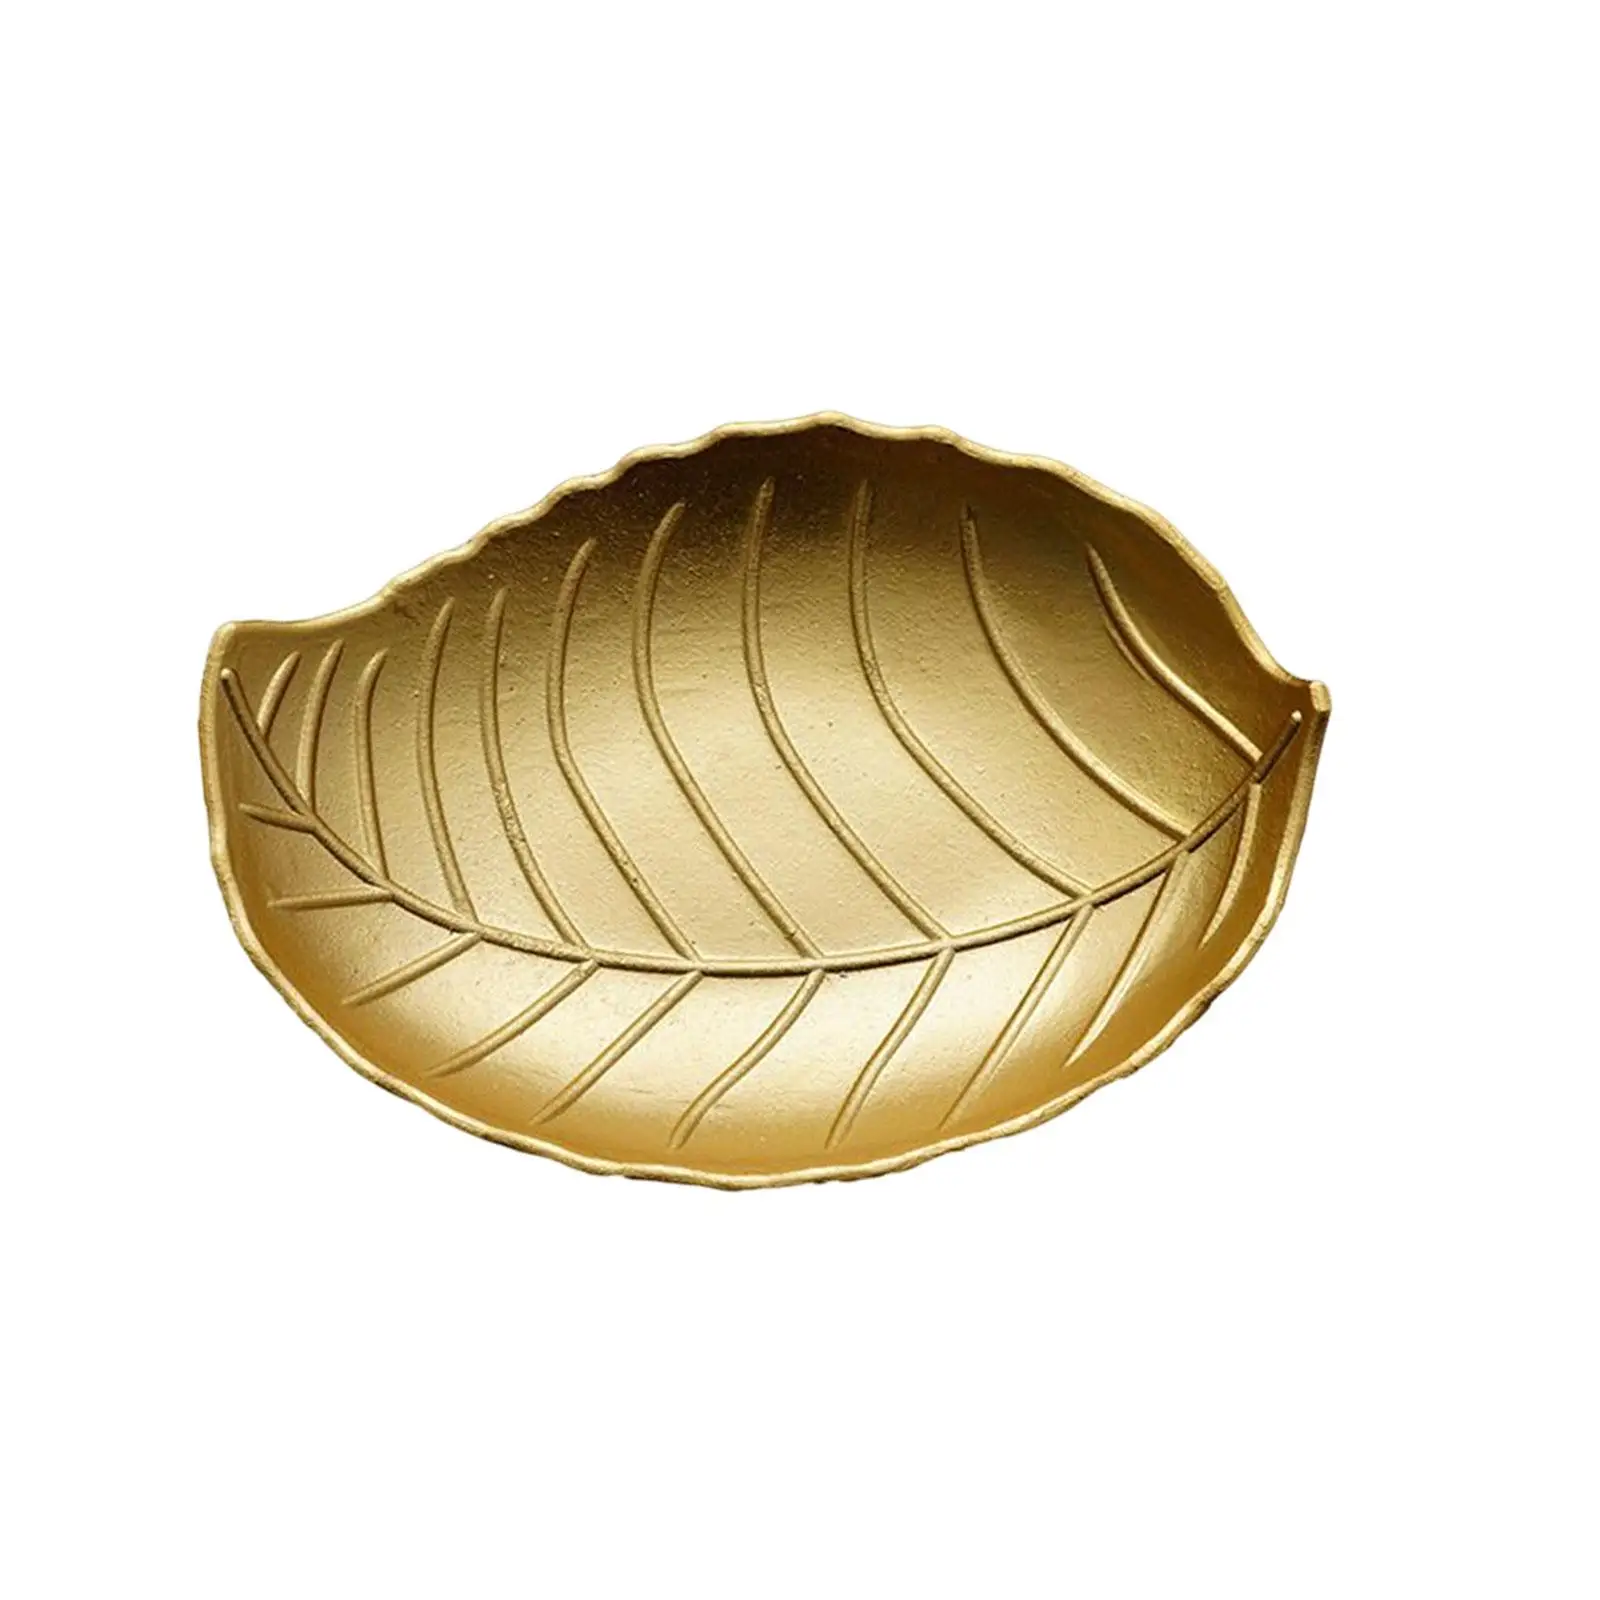 Wooden Leaf Shape Refreshment Tray Bread Plate Tableware for Home Decoration